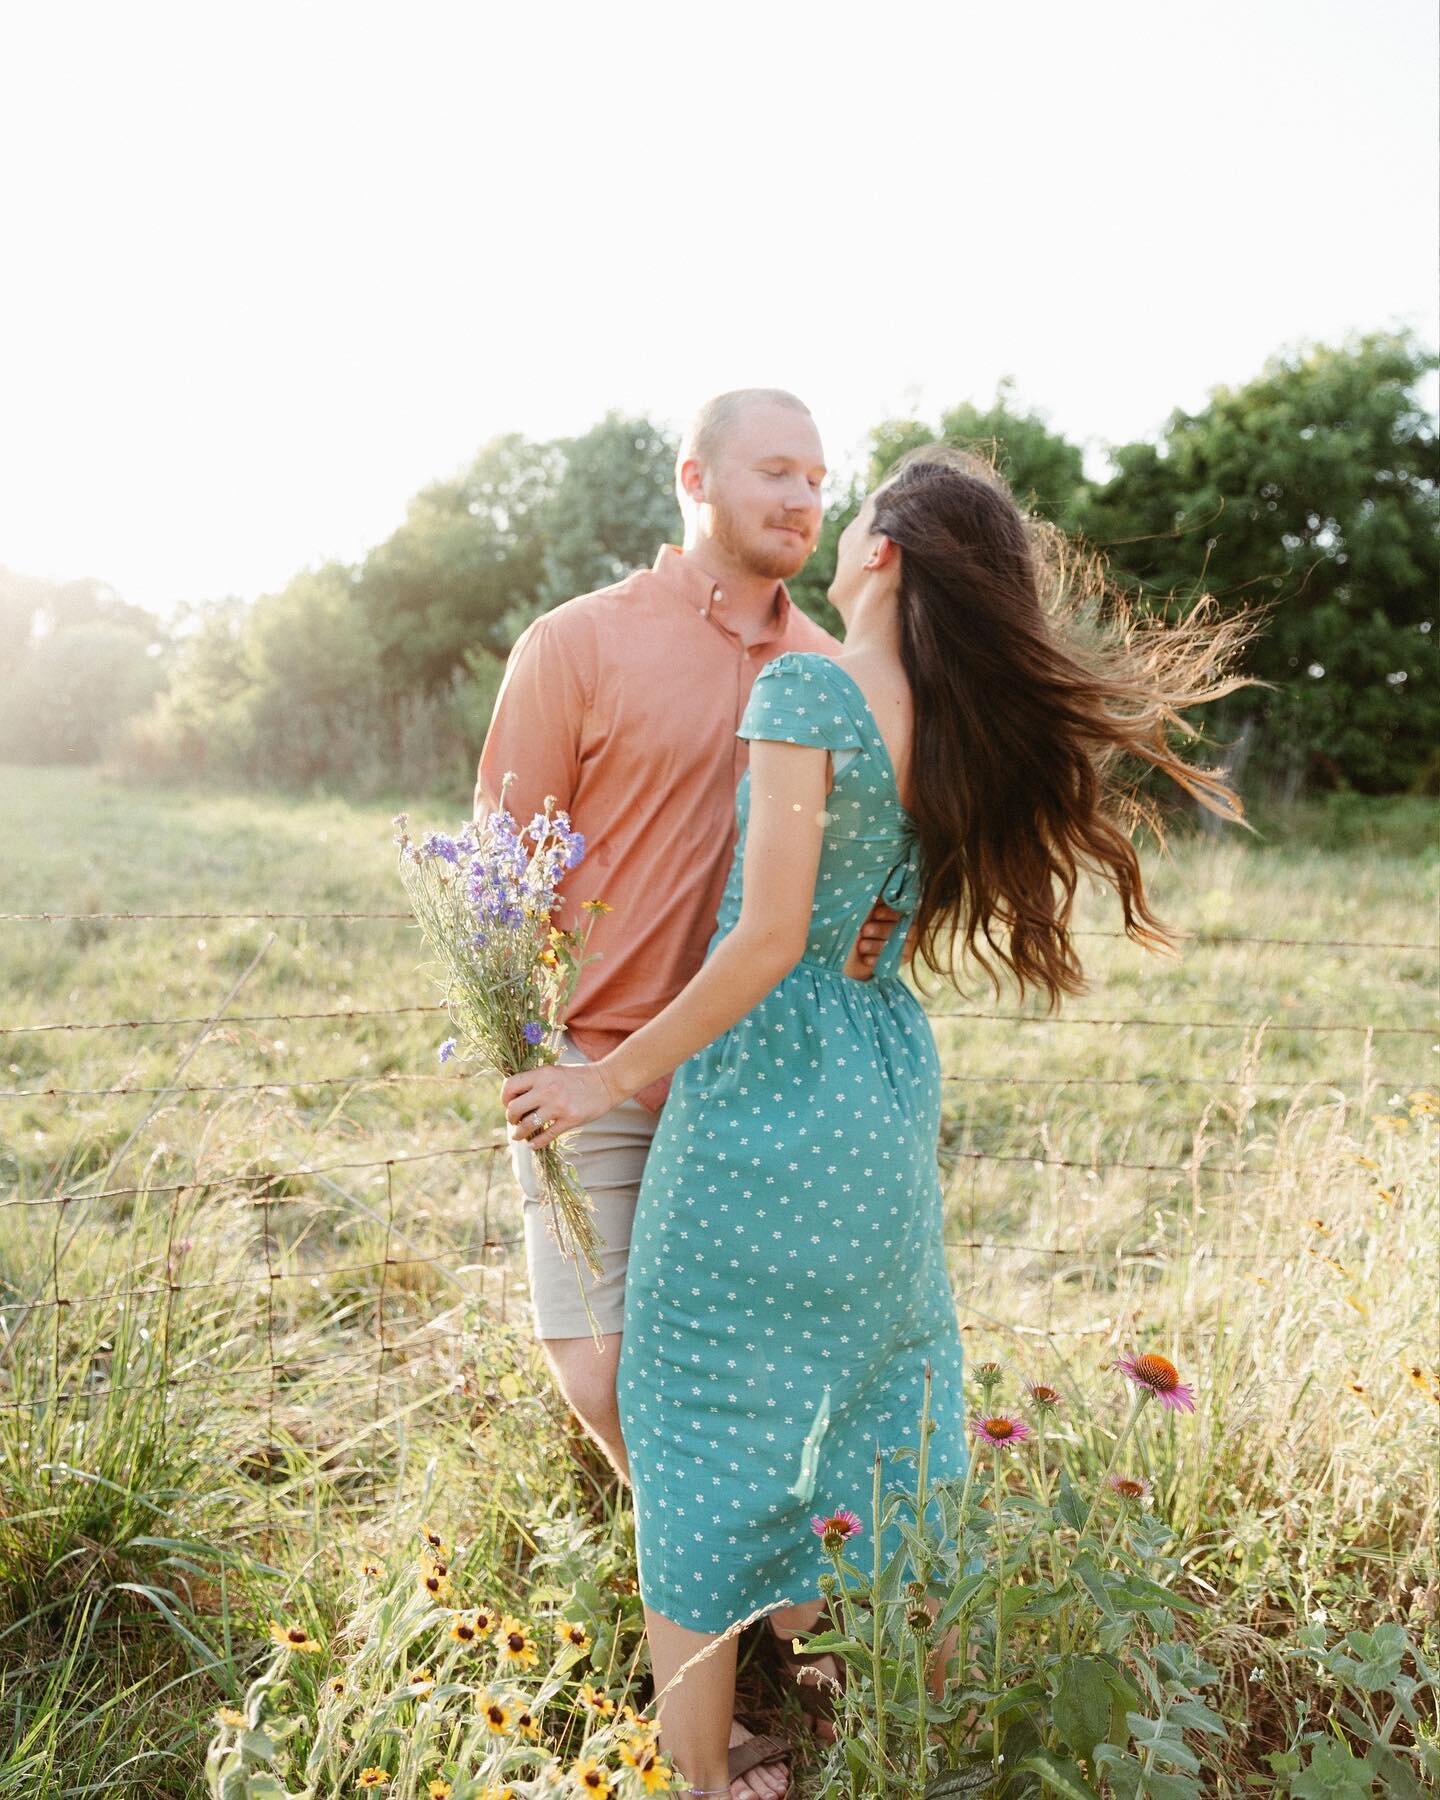 These two love birds and their dreamy Smithville engagement session 😍
Spot the pups at the end 🥰
.
.
.

#kcphotographer #missouriphotographer #missouriweddingphotographer #kansascityphotographer #midwestphotographer #thebelovedstories #authenticlov